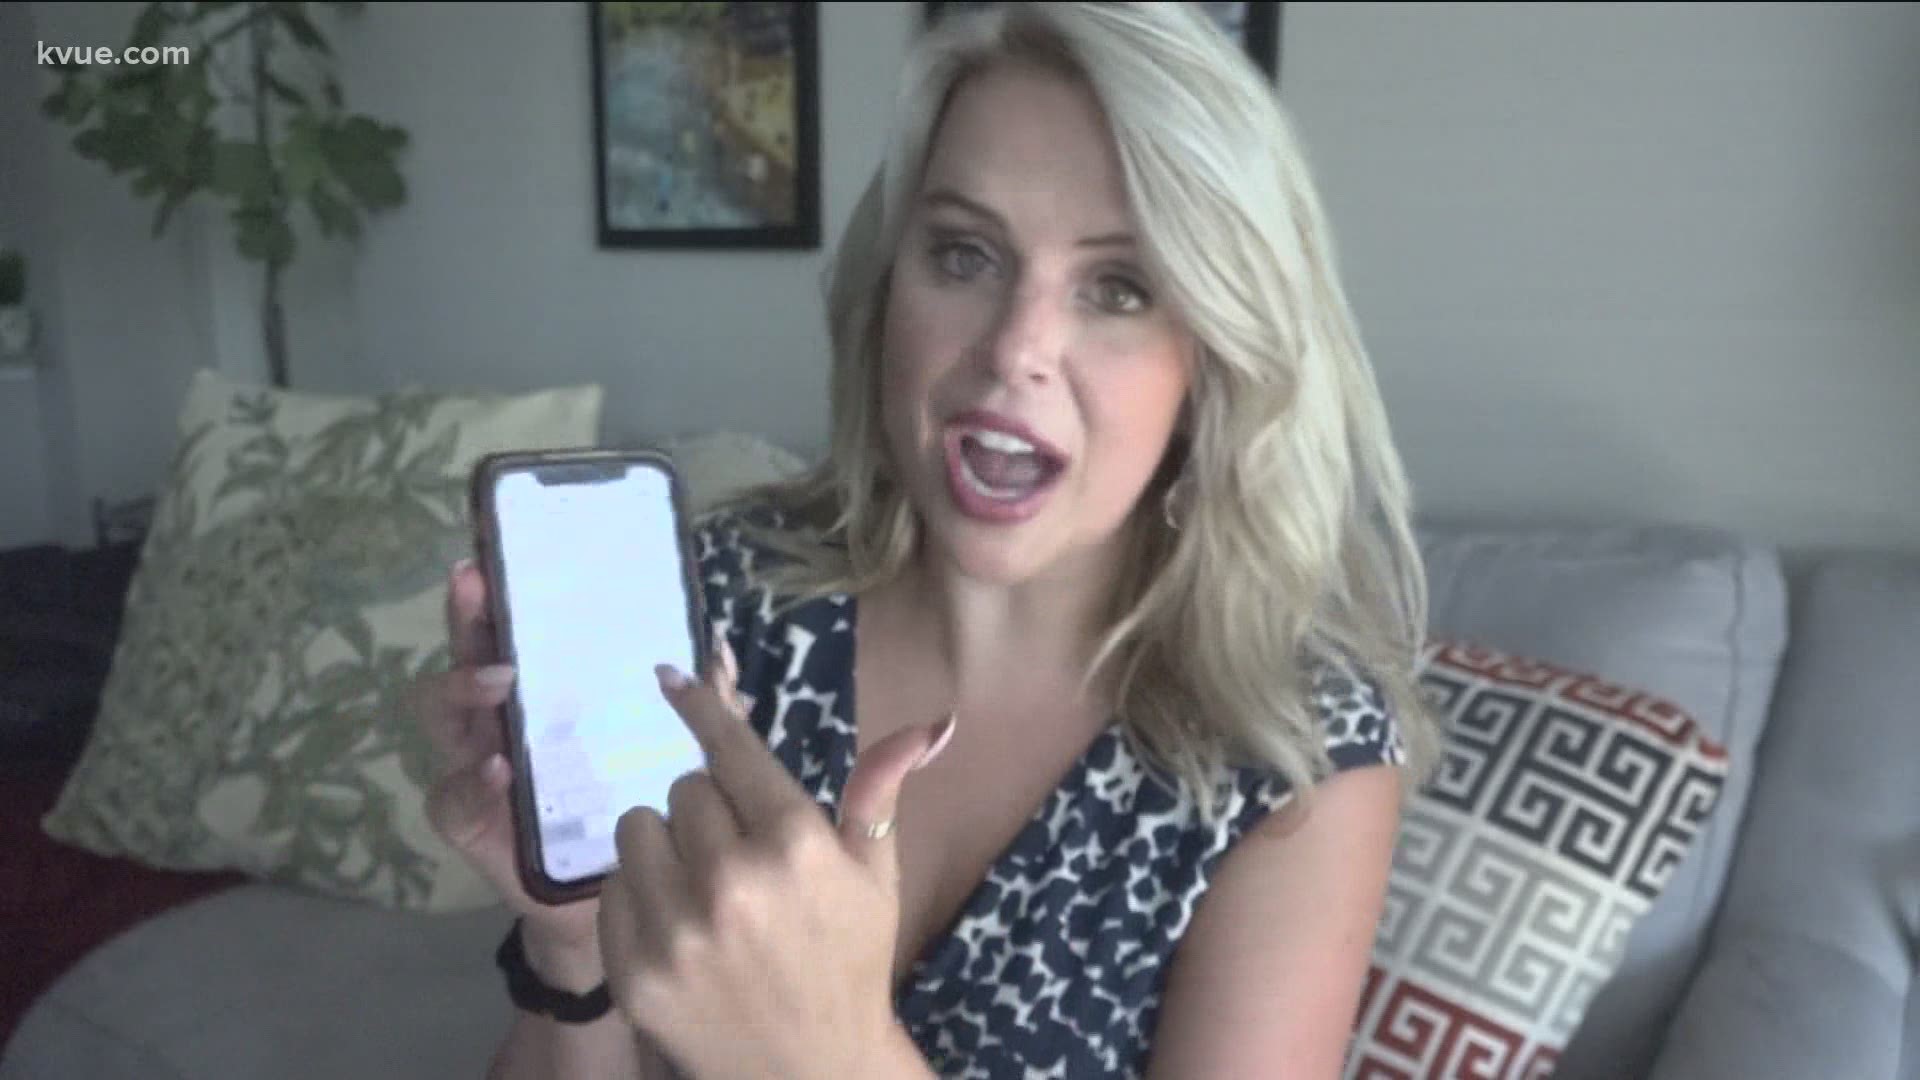 Following the arrest of a Cedar Park man in a sexual assault case involving a child, KVUE’S Hannah Rucker shares how to keeps kids safe on apps over the summer.